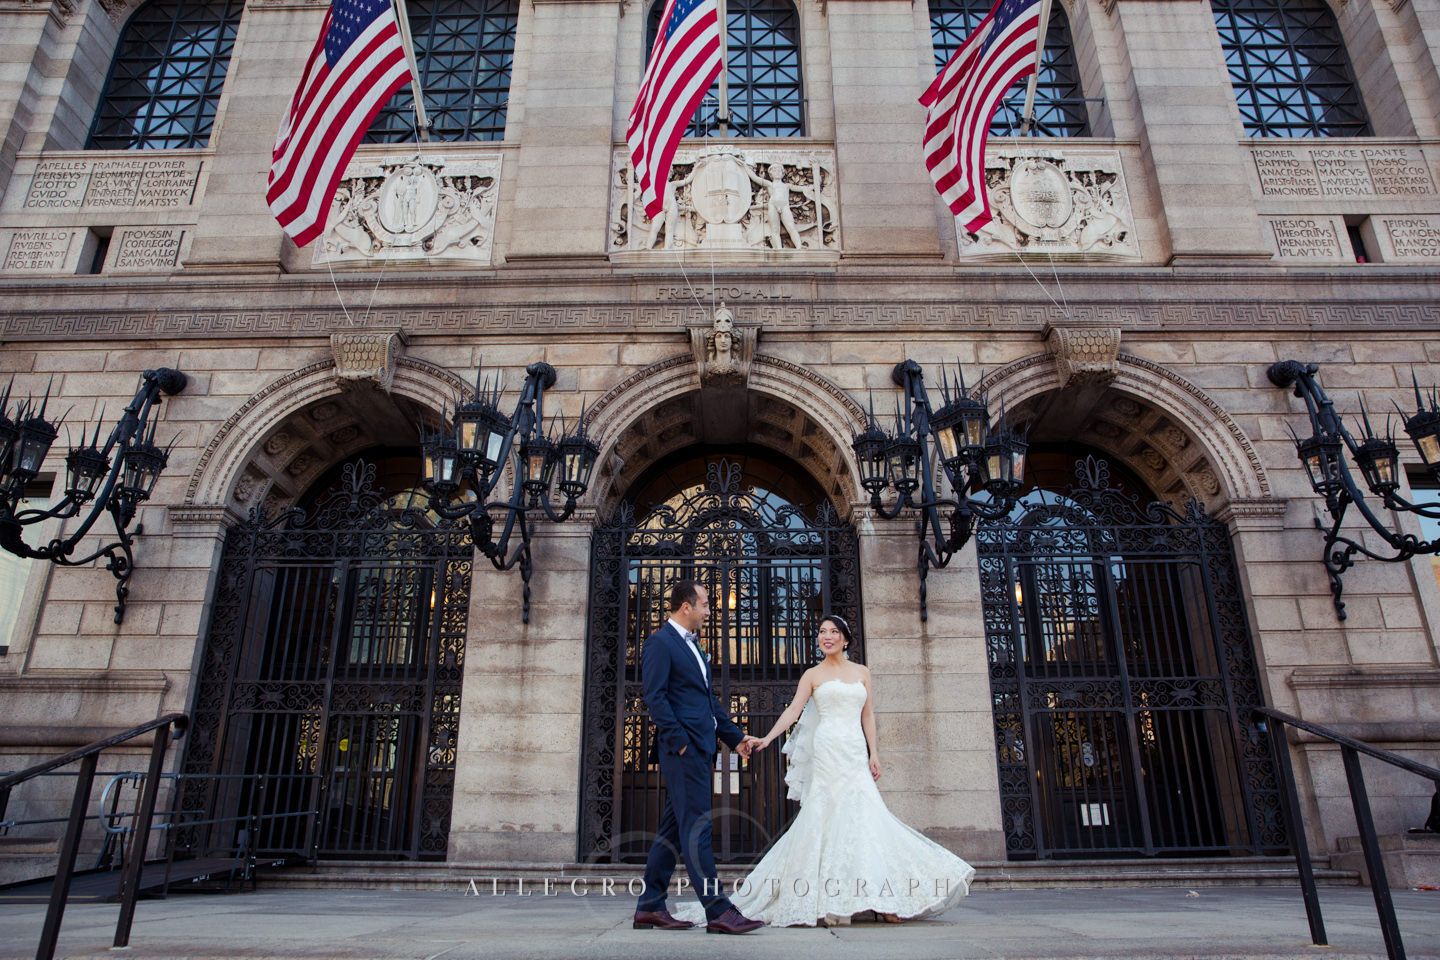 Couple Portraits at the Boston Public Library - photo by Allegro Photography